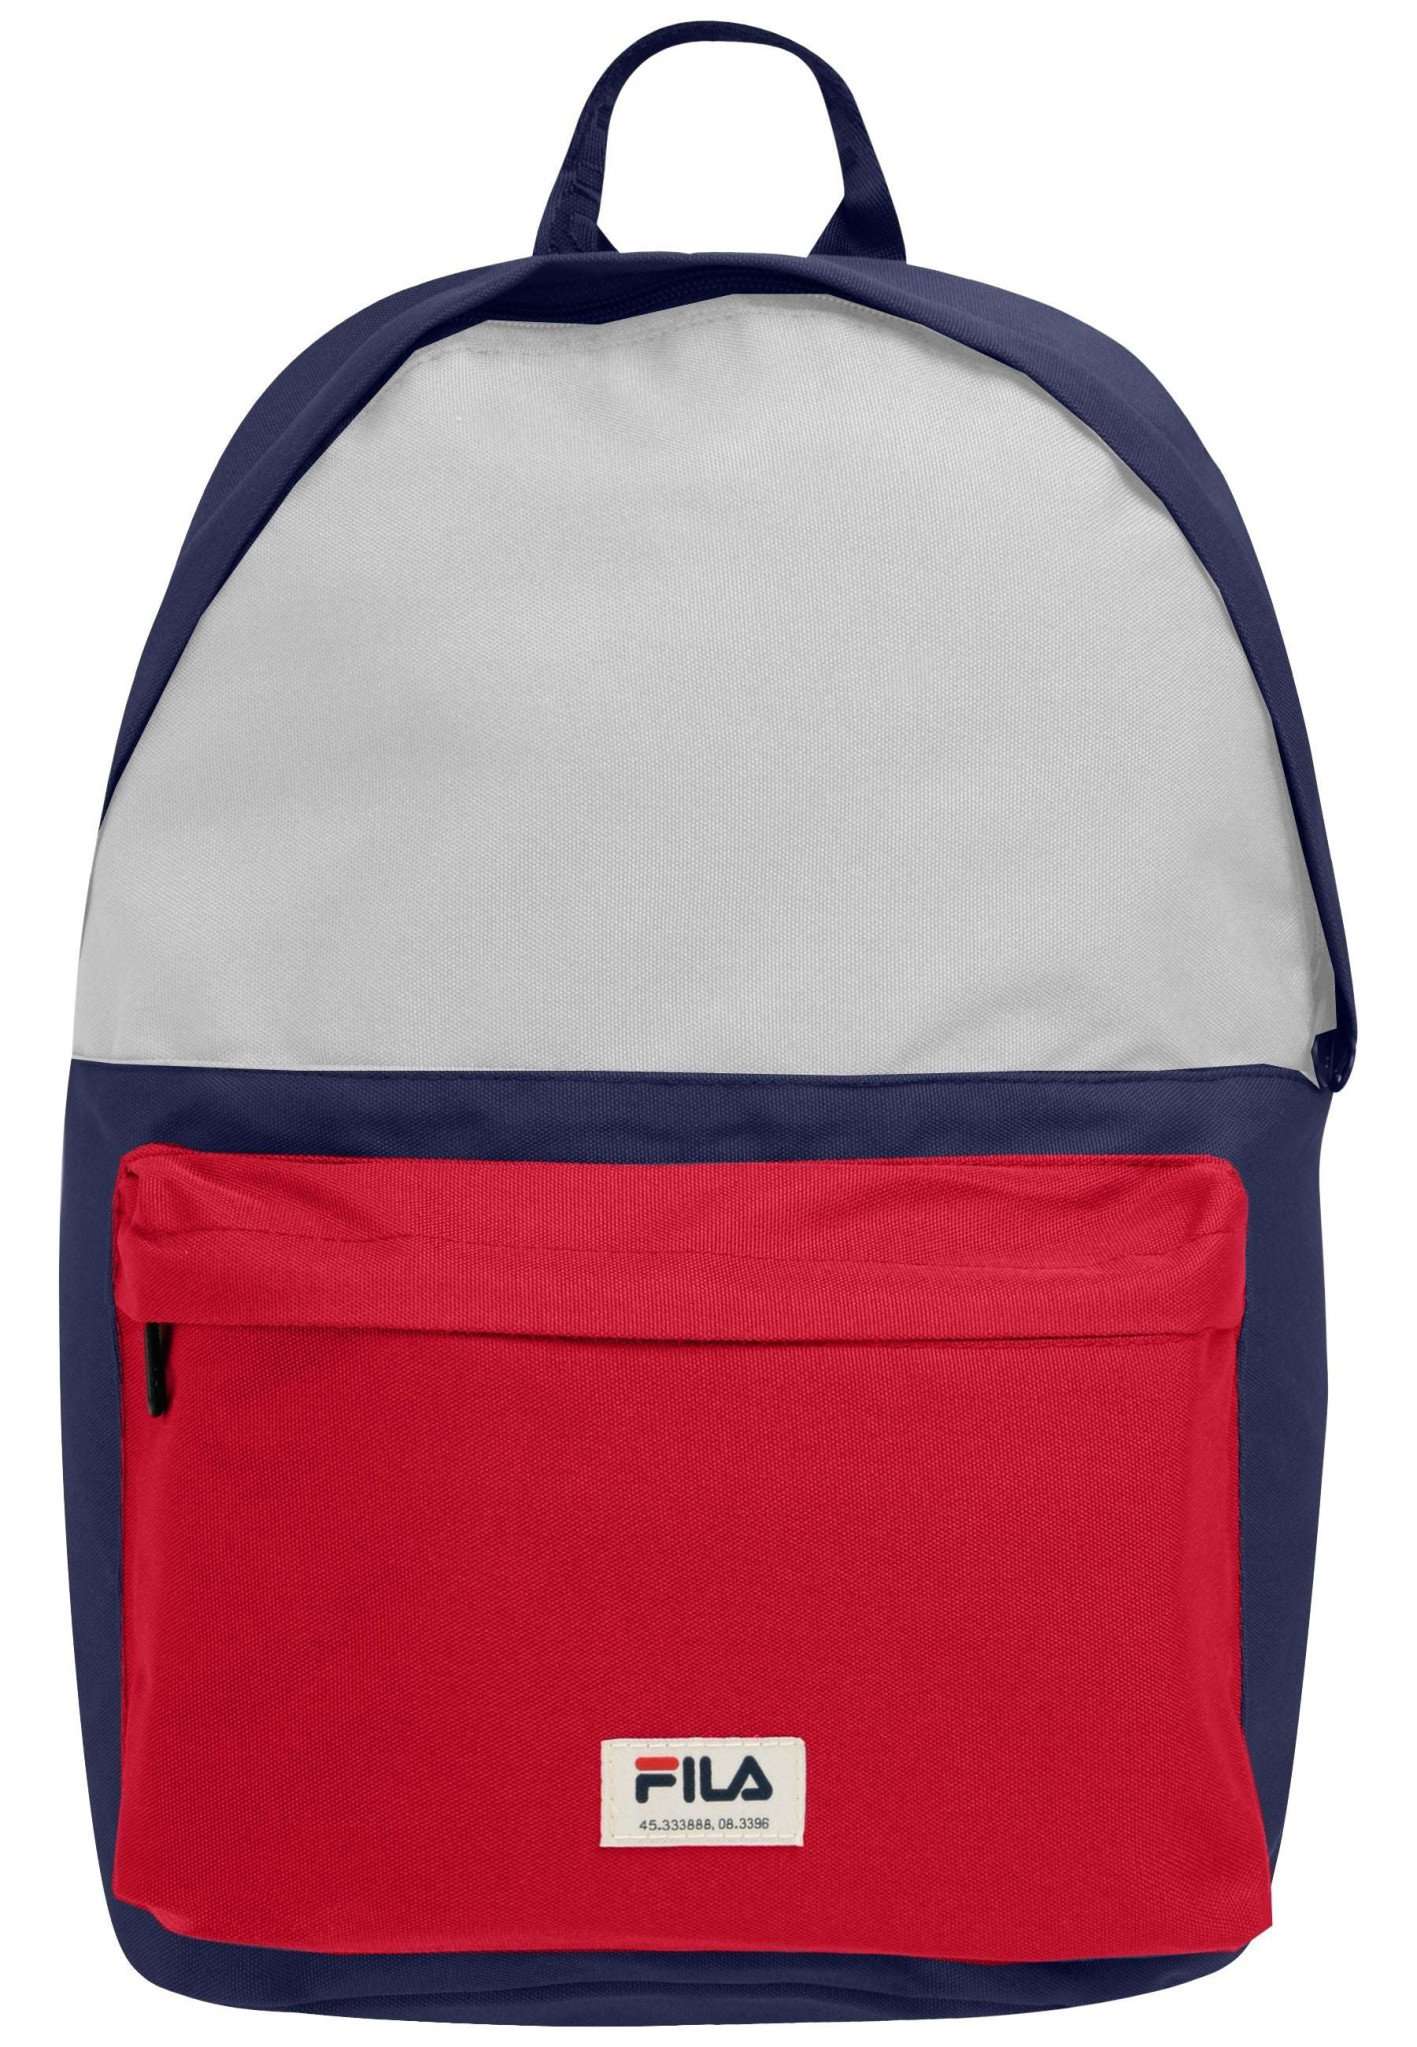 Boma Badge Backpack Sâ€™Cool Two in Medieval Blue-Bright White-True Red Rucksäcke Fila   